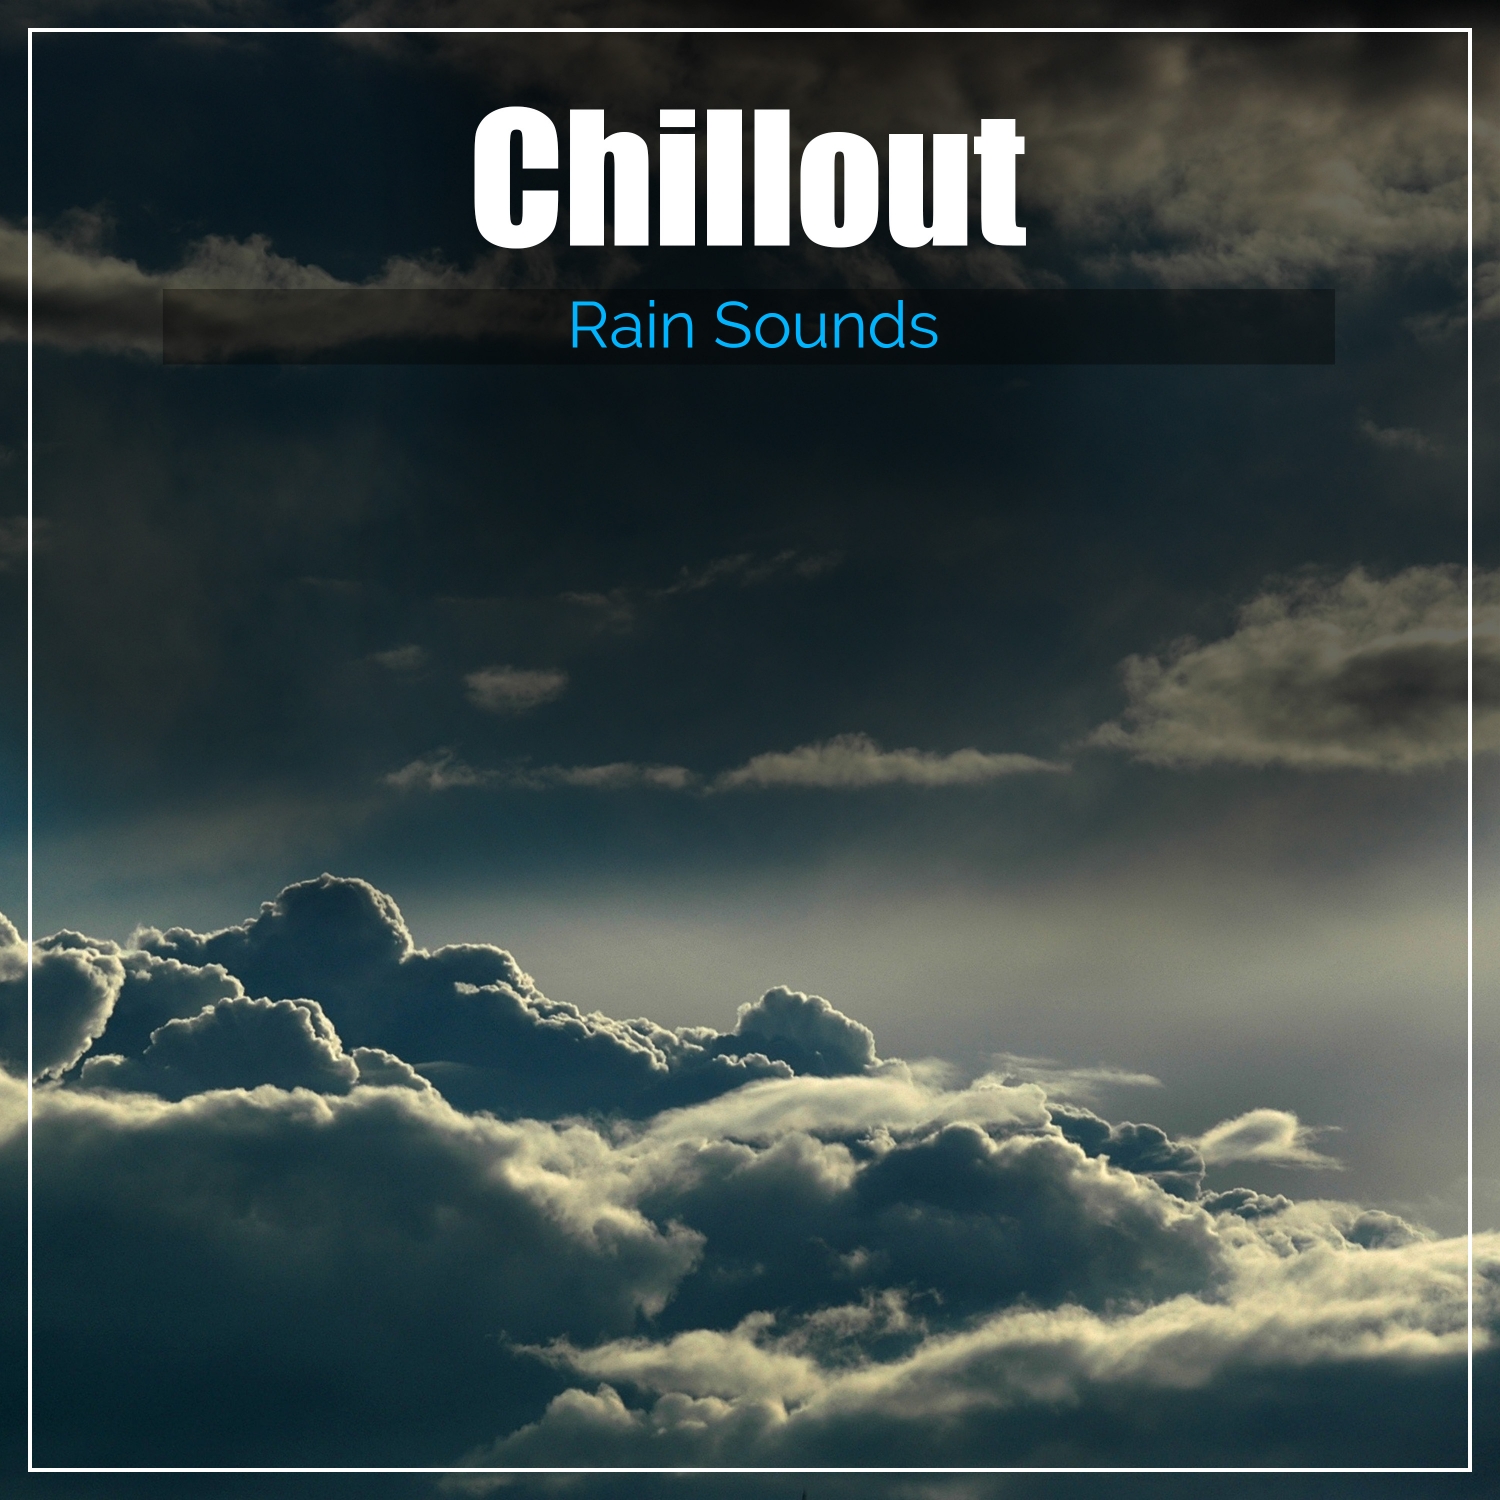 15 Chillout Rain Sounds - Sleep, Unwind, Relax, Meditate, Study or Yoga